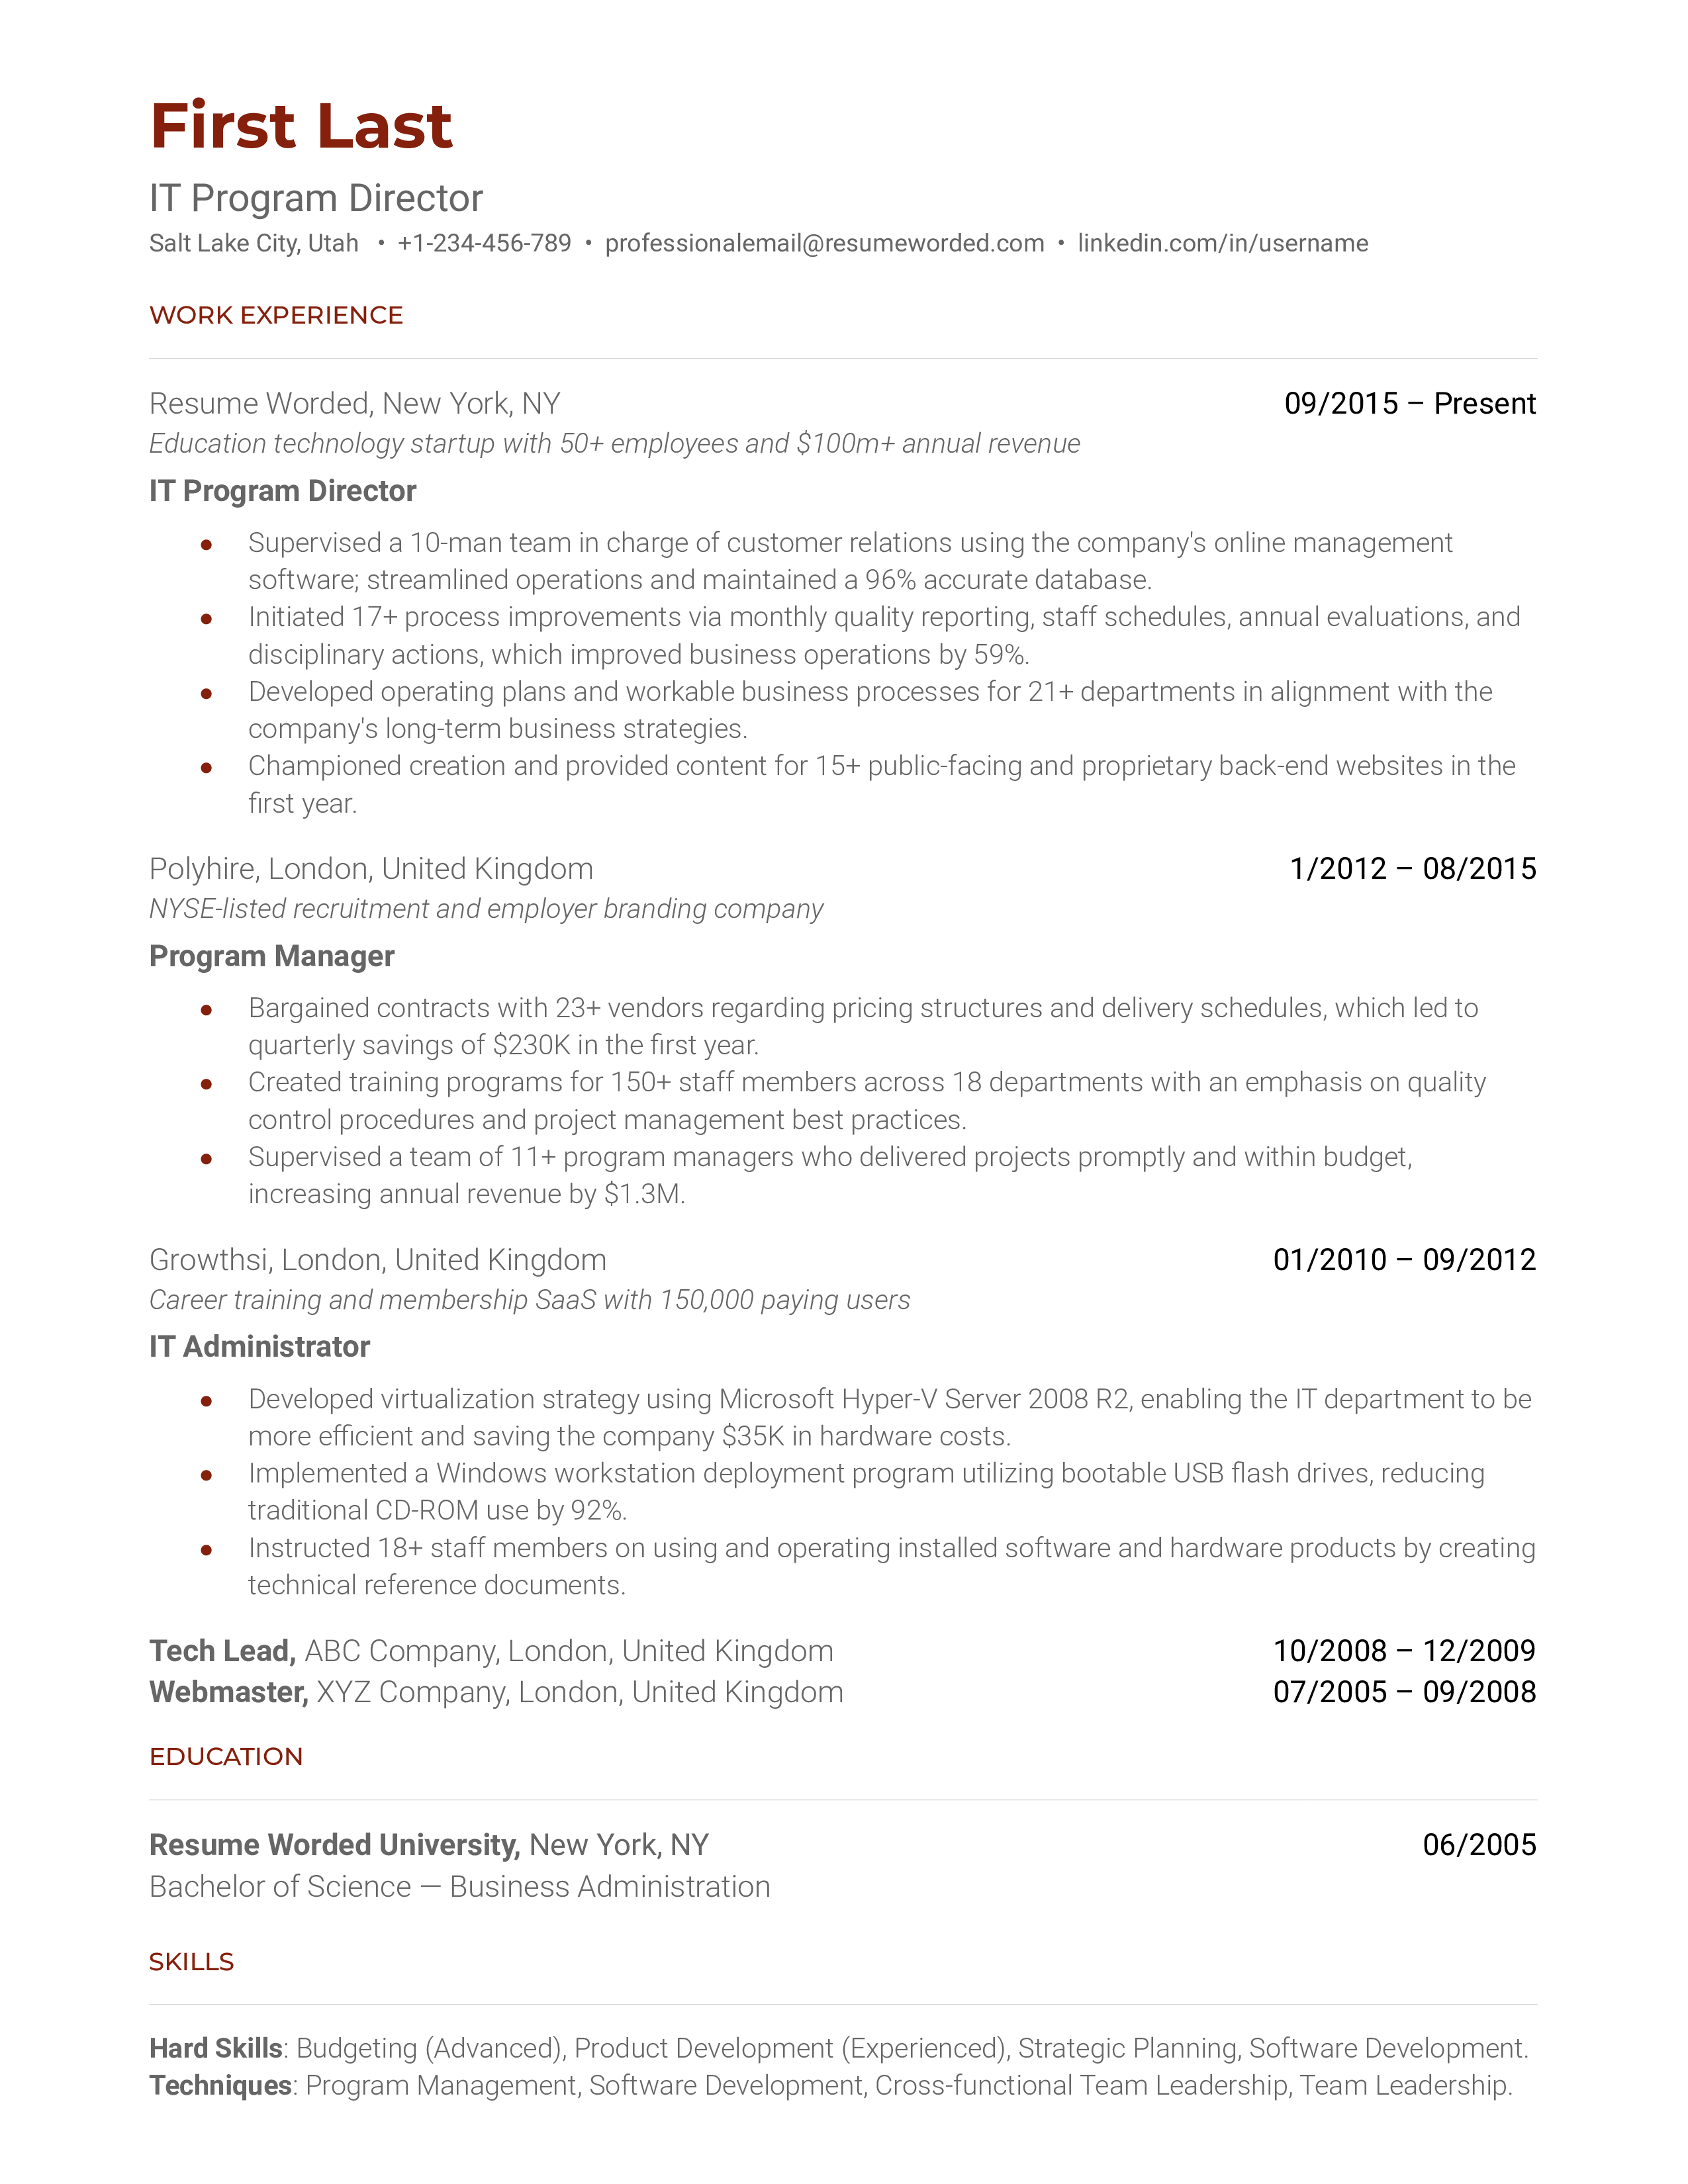 A IT Program Director resume template including contact information and relevant work experience. 